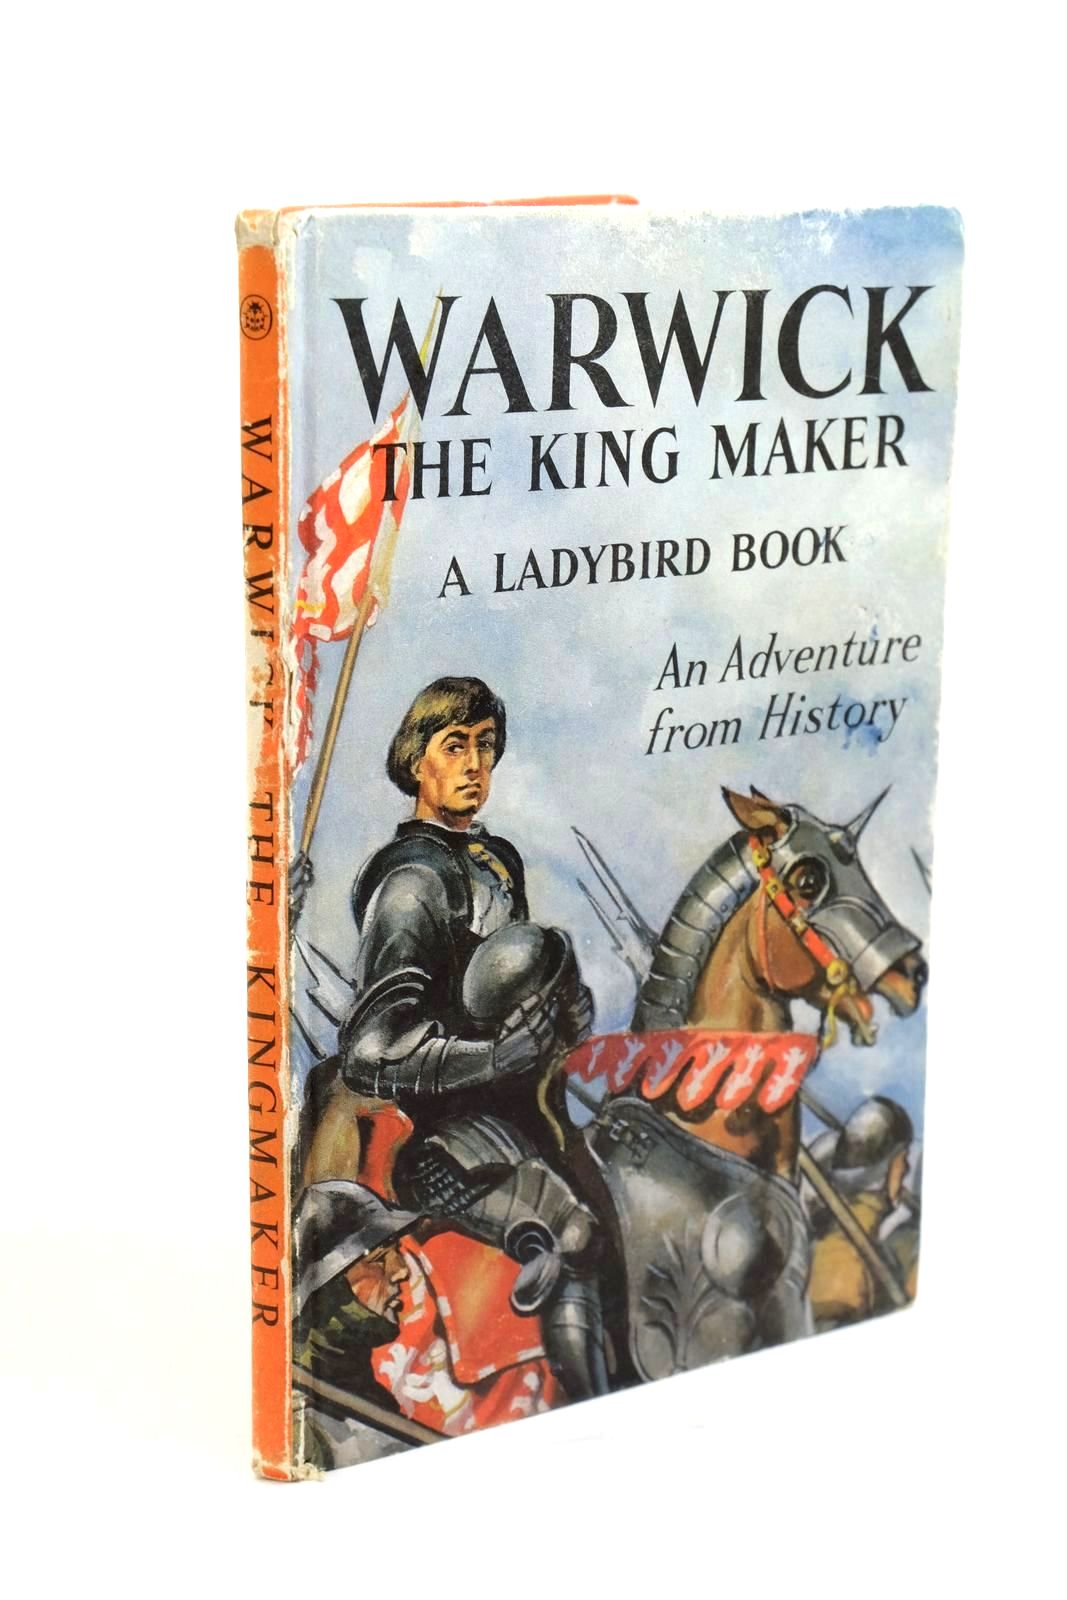 Photo of WARWICK THE KINGMAKER written by Peach, L. Du Garde illustrated by Kenney, John published by Wills &amp; Hepworth Ltd. (STOCK CODE: 1321323)  for sale by Stella & Rose's Books